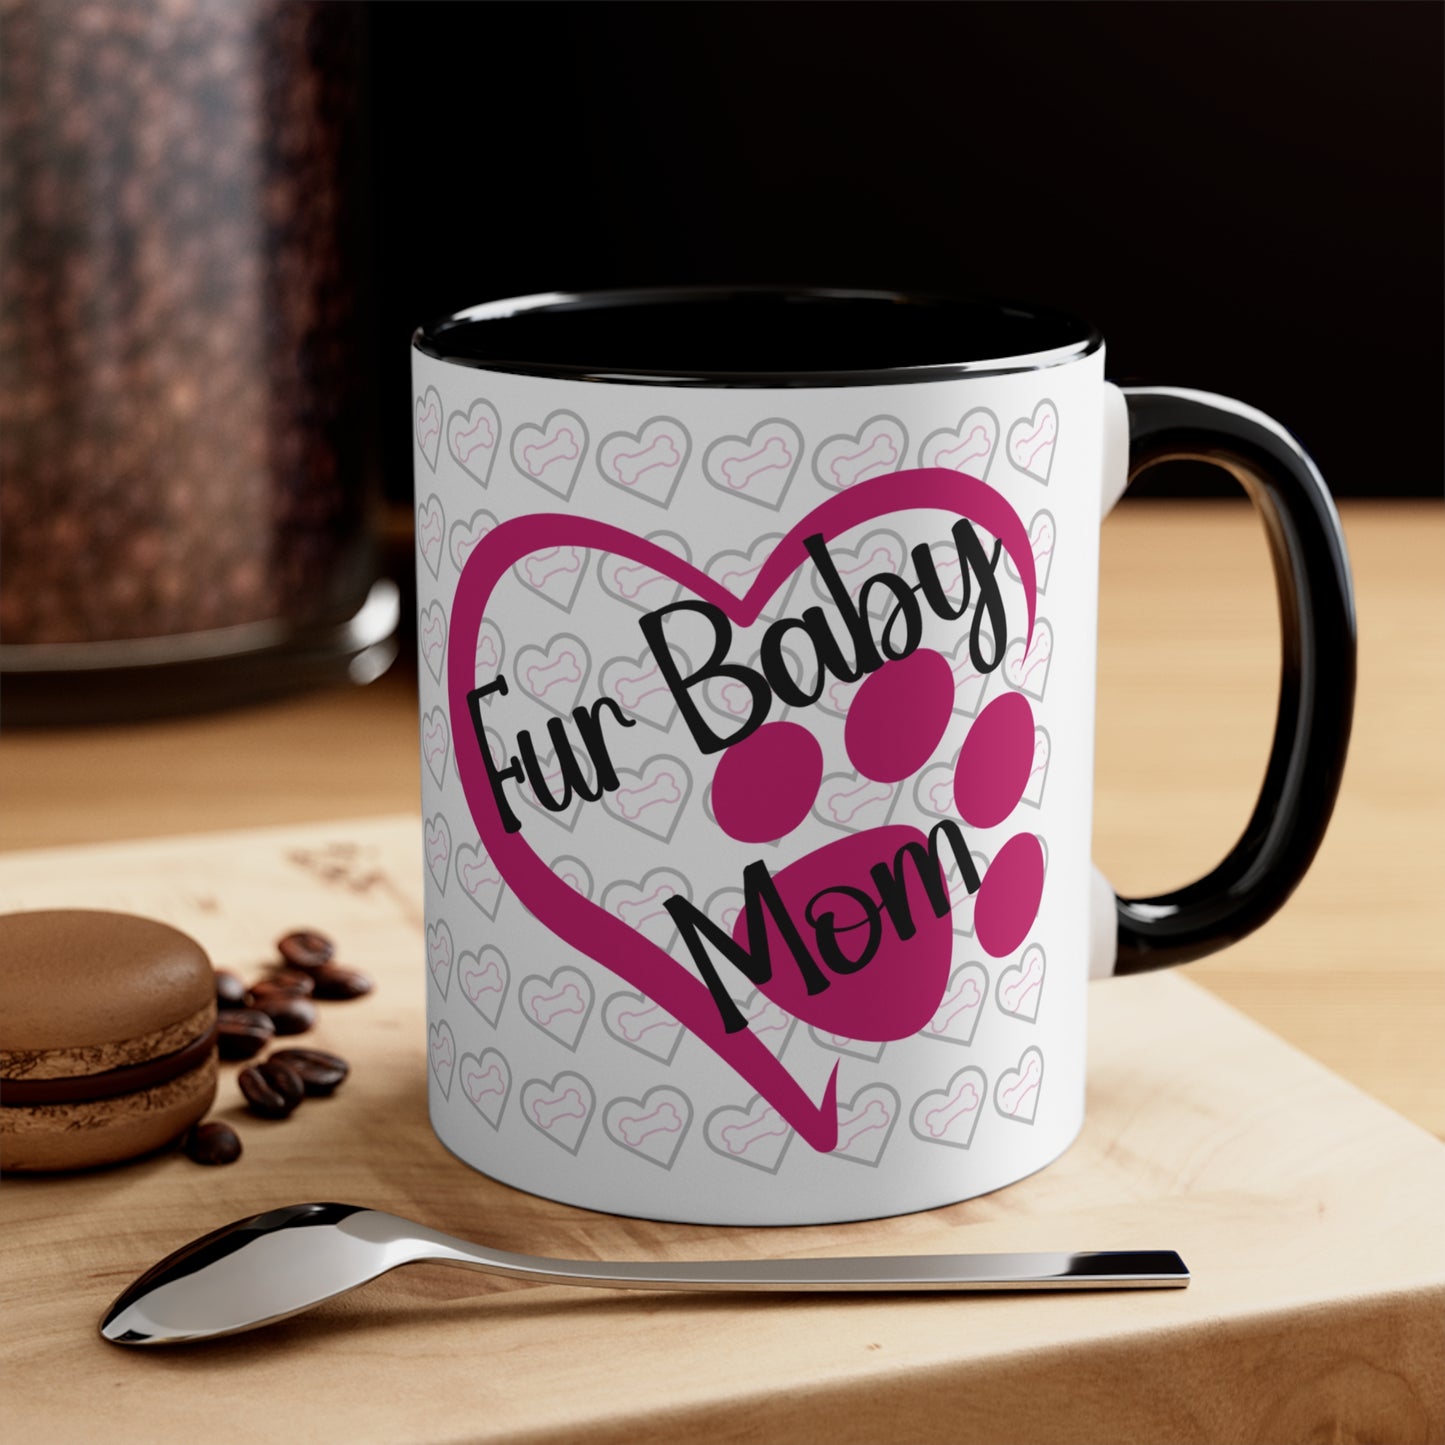 Fur baby mom coffee mug with pink heart and paw print 11 oz, front view in black.